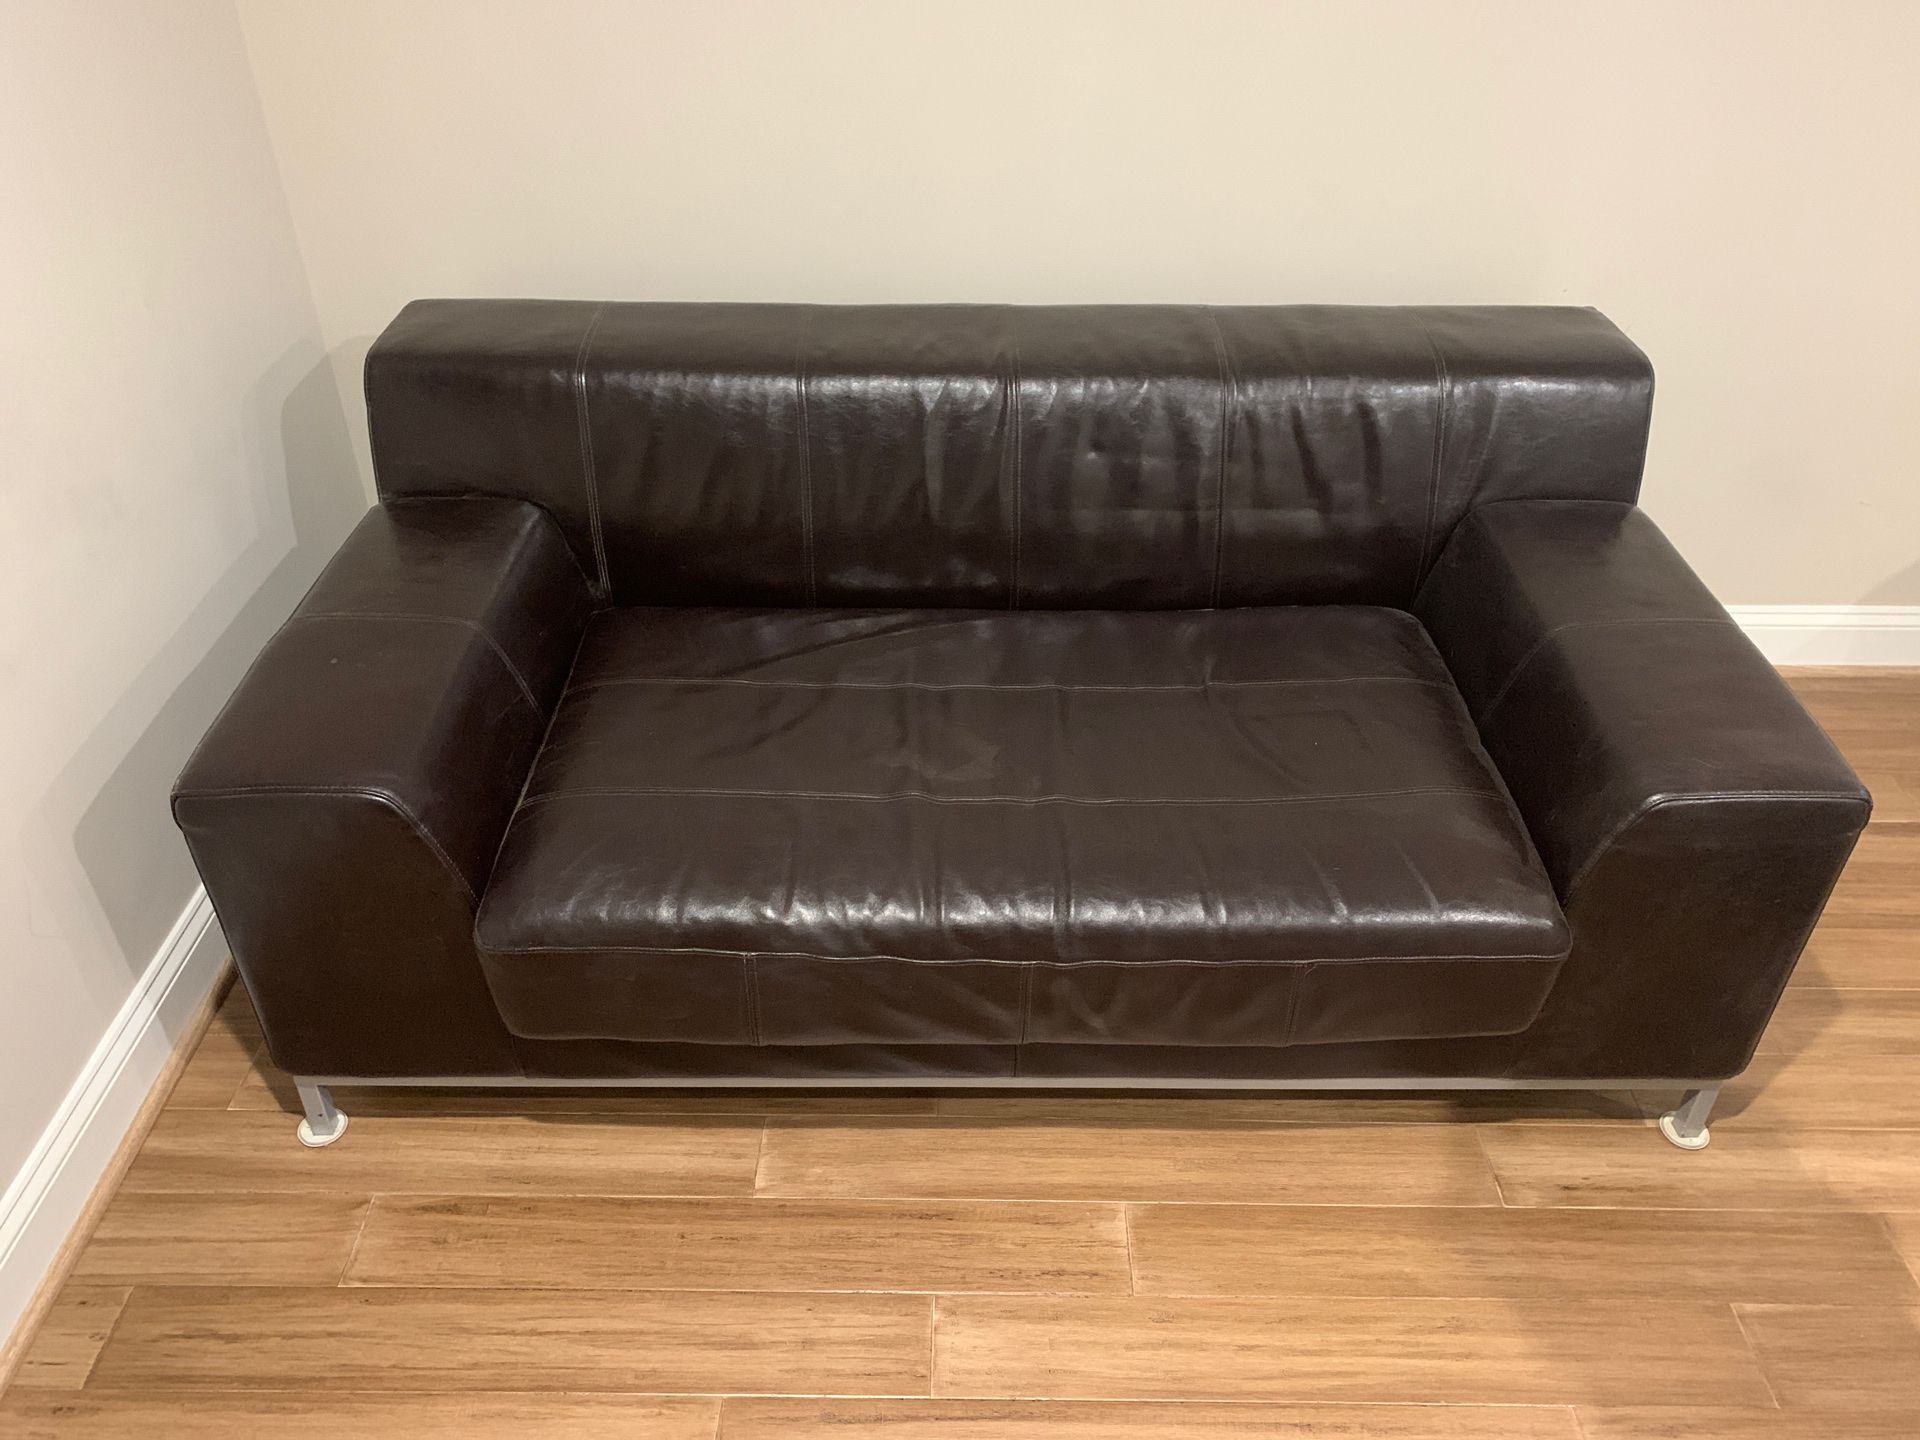 70 Inches Long/ 38 inches Wide Depth 27 inches. Real Italian leather loveseat espresso brown. Cool love seat for amazing price.